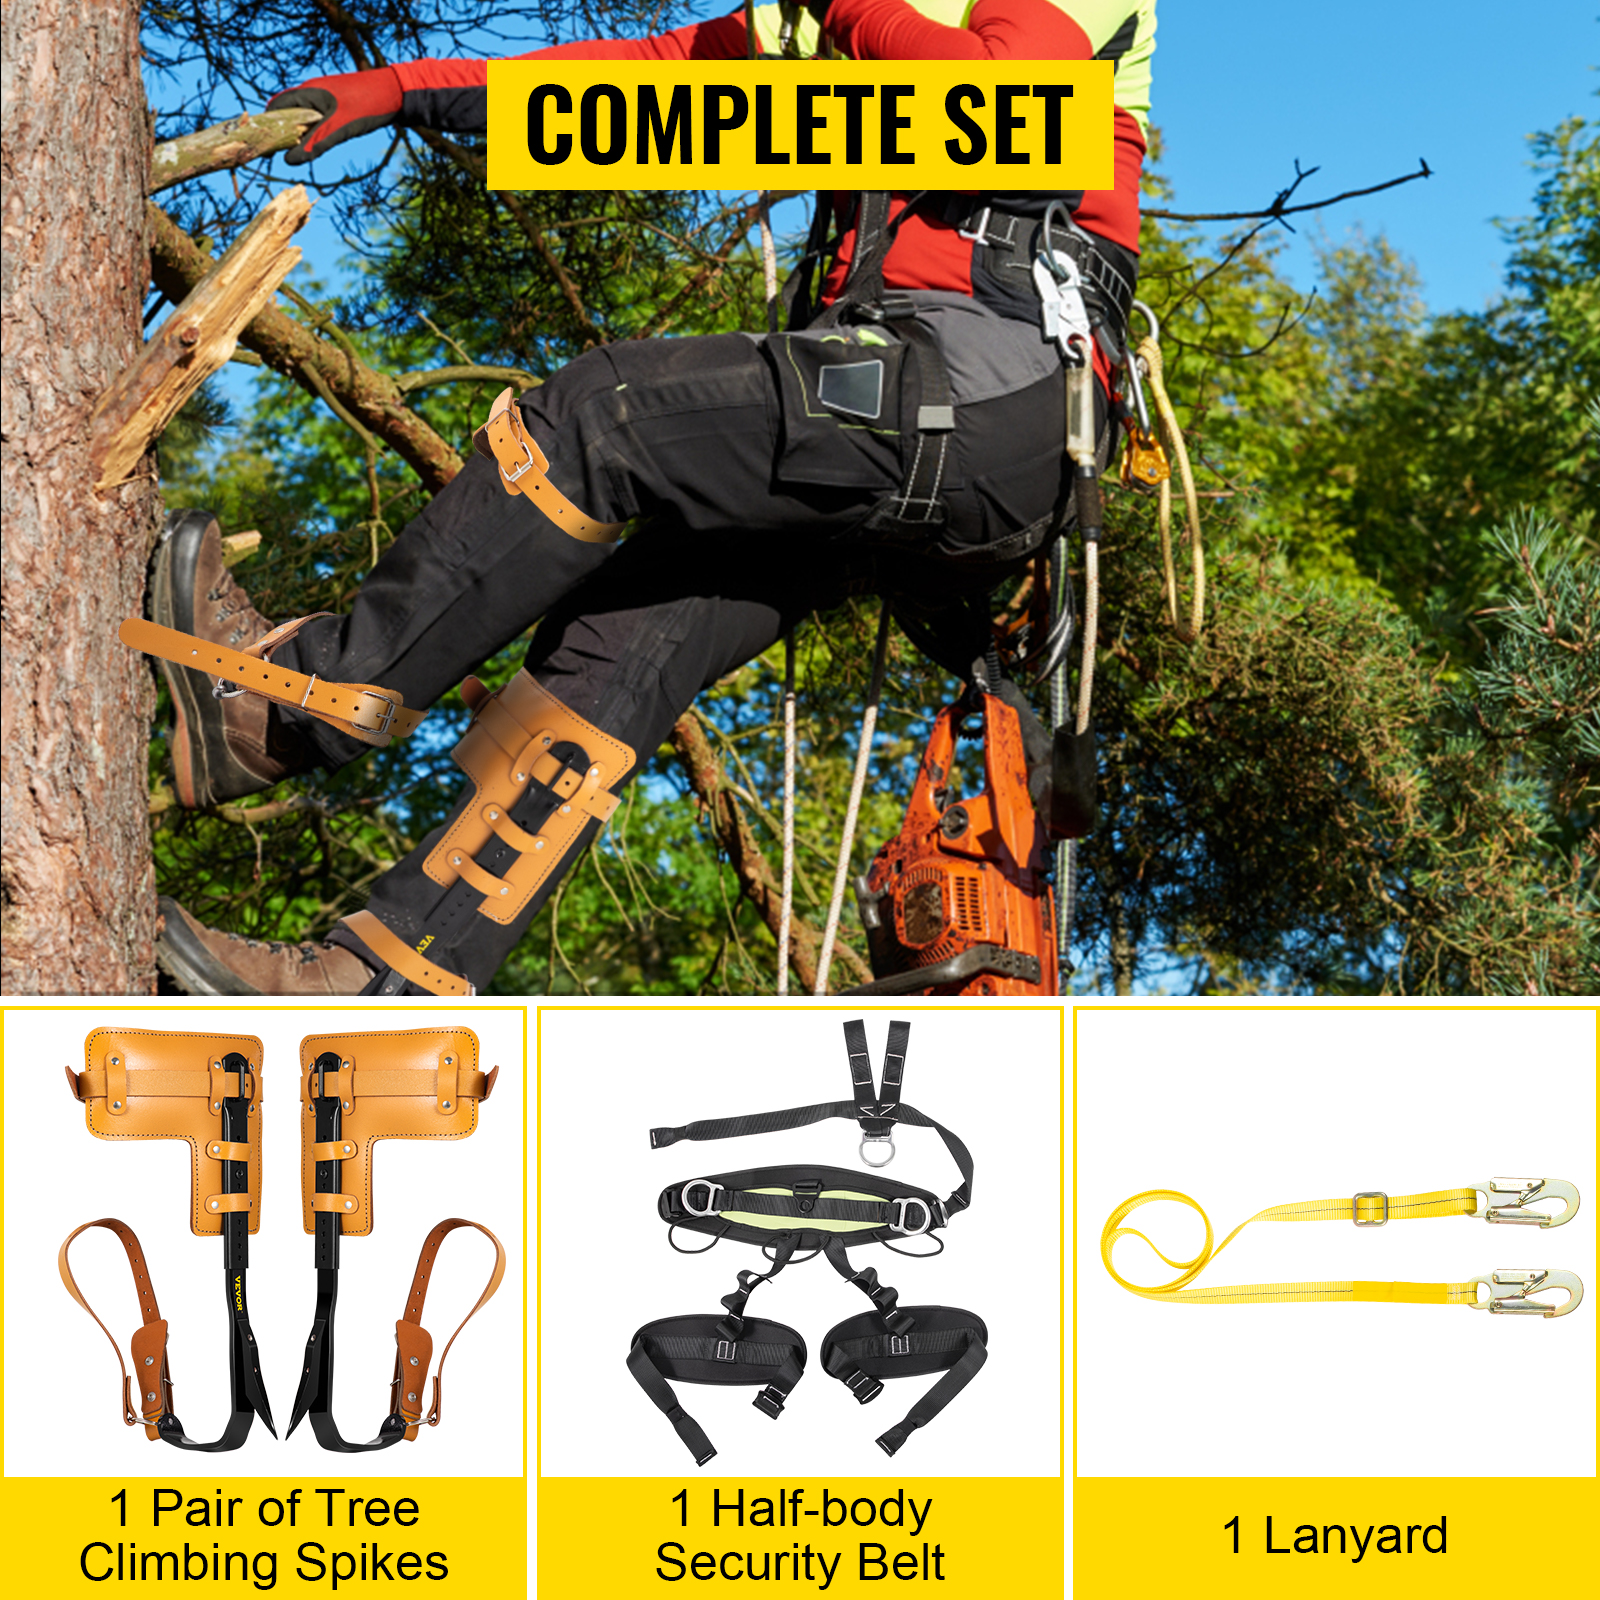 VEVOR Tree Climbing Spikes, 3 in 1 Alloy Steel Adjustable Pole Climbing  Spurs, w/ Security Harness and Lanyard, Arborist Equipment for Climbers,  Logging, Hunting Observation, Fruit Picking